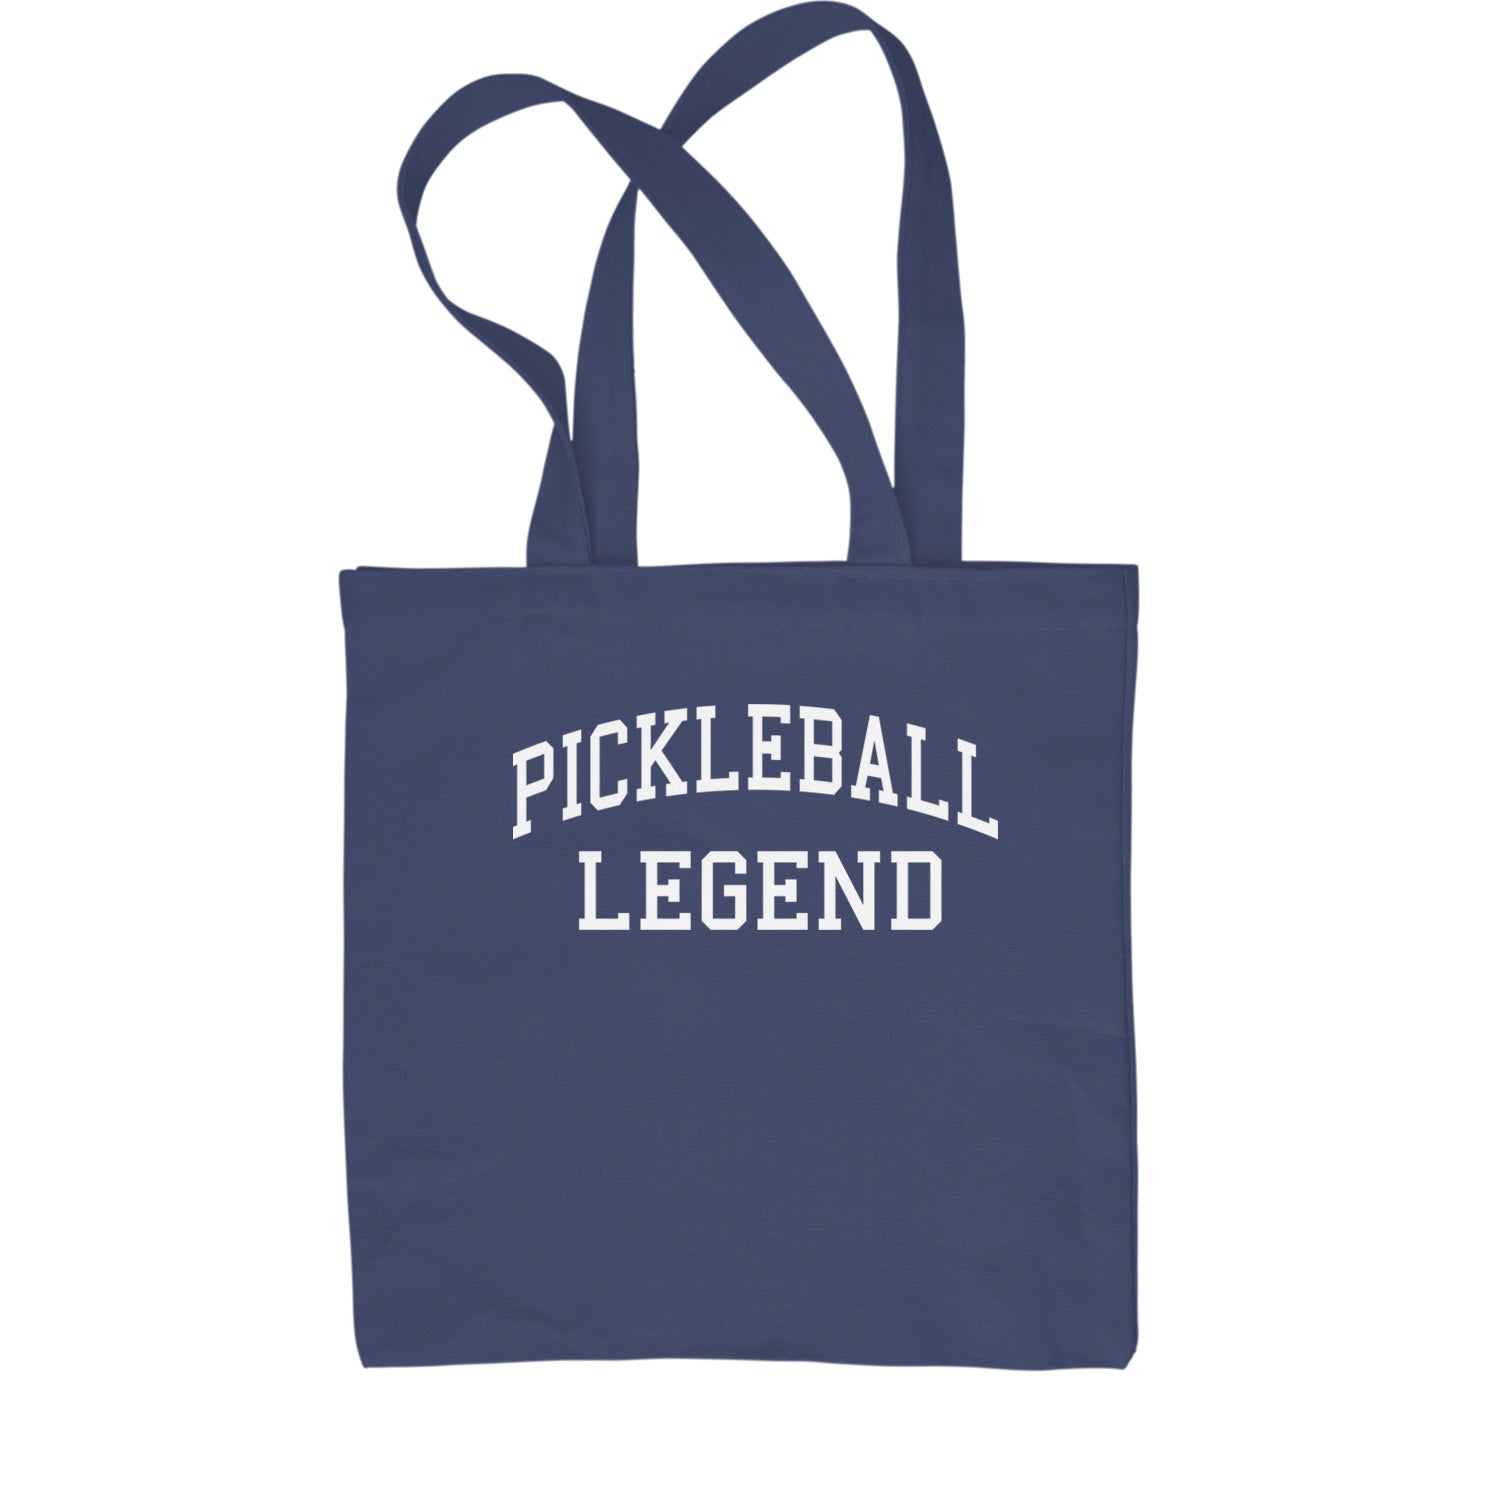 Pickleball Legend Shopping Tote Bag ball, dink, dinking, pickle, pickleball by Expression Tees